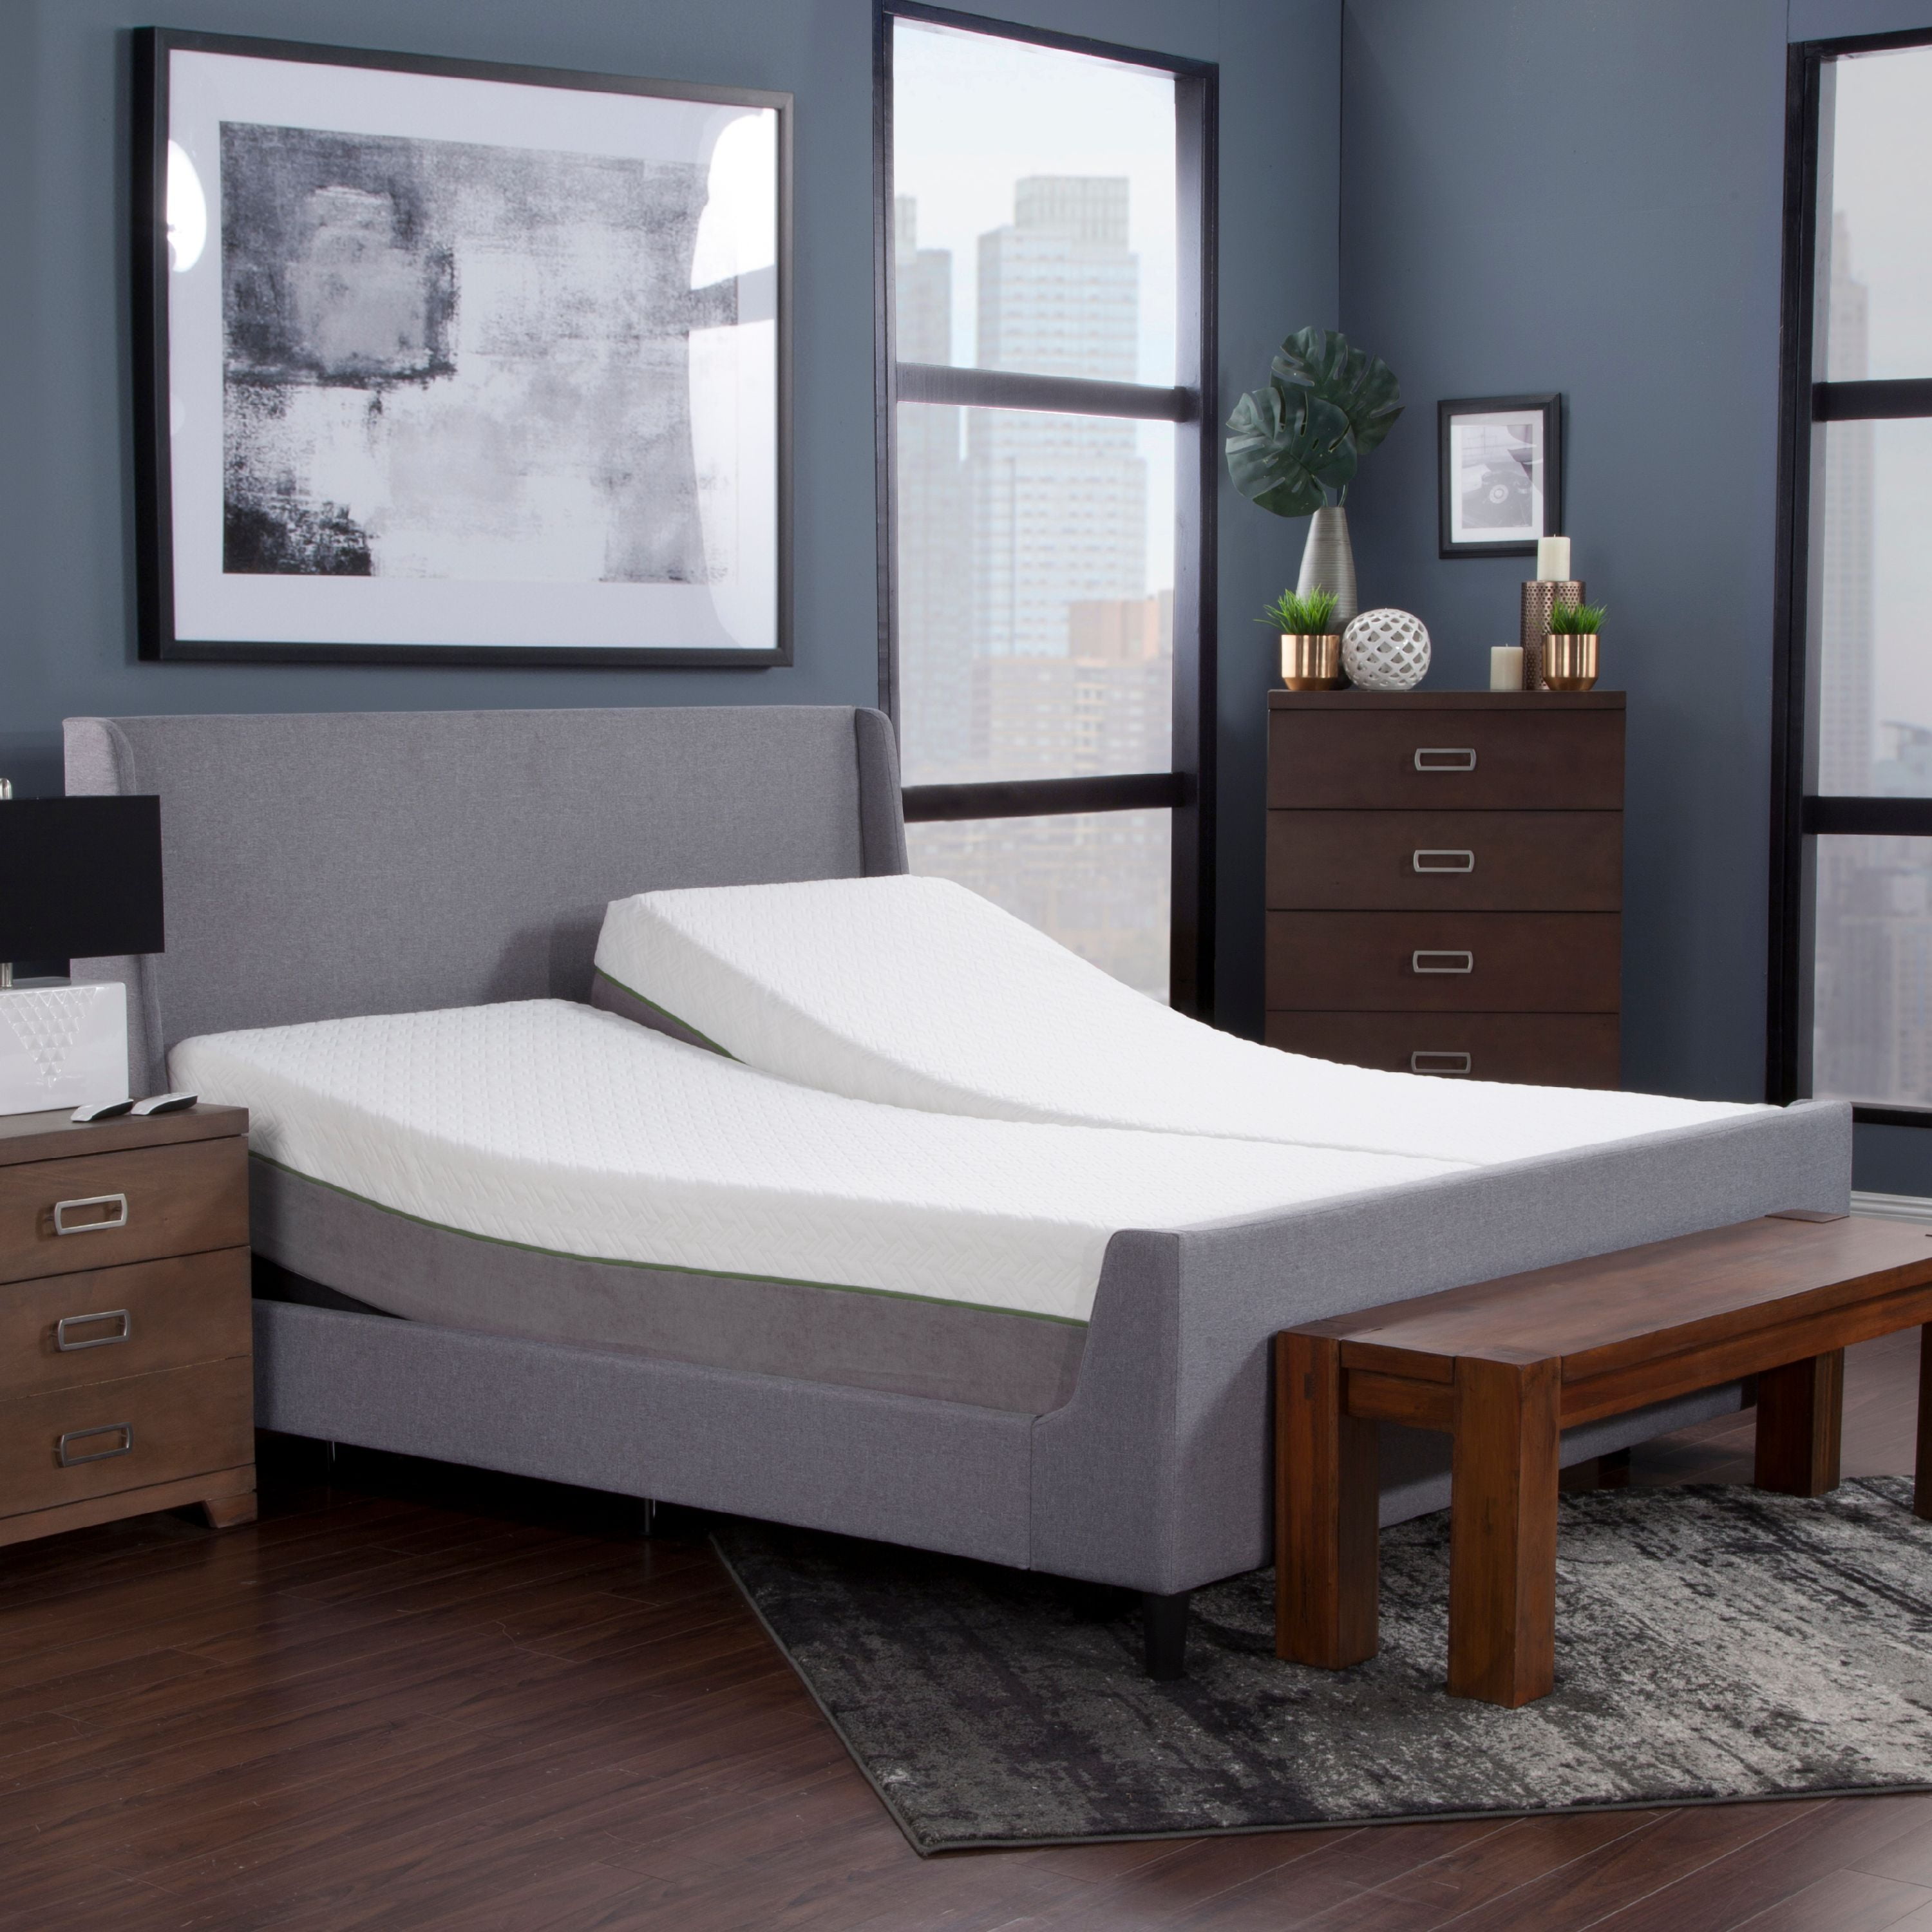 Blissful Nights 12" Copper Infused Memory Foam Mattress, Cal King Split and Adjustable Base